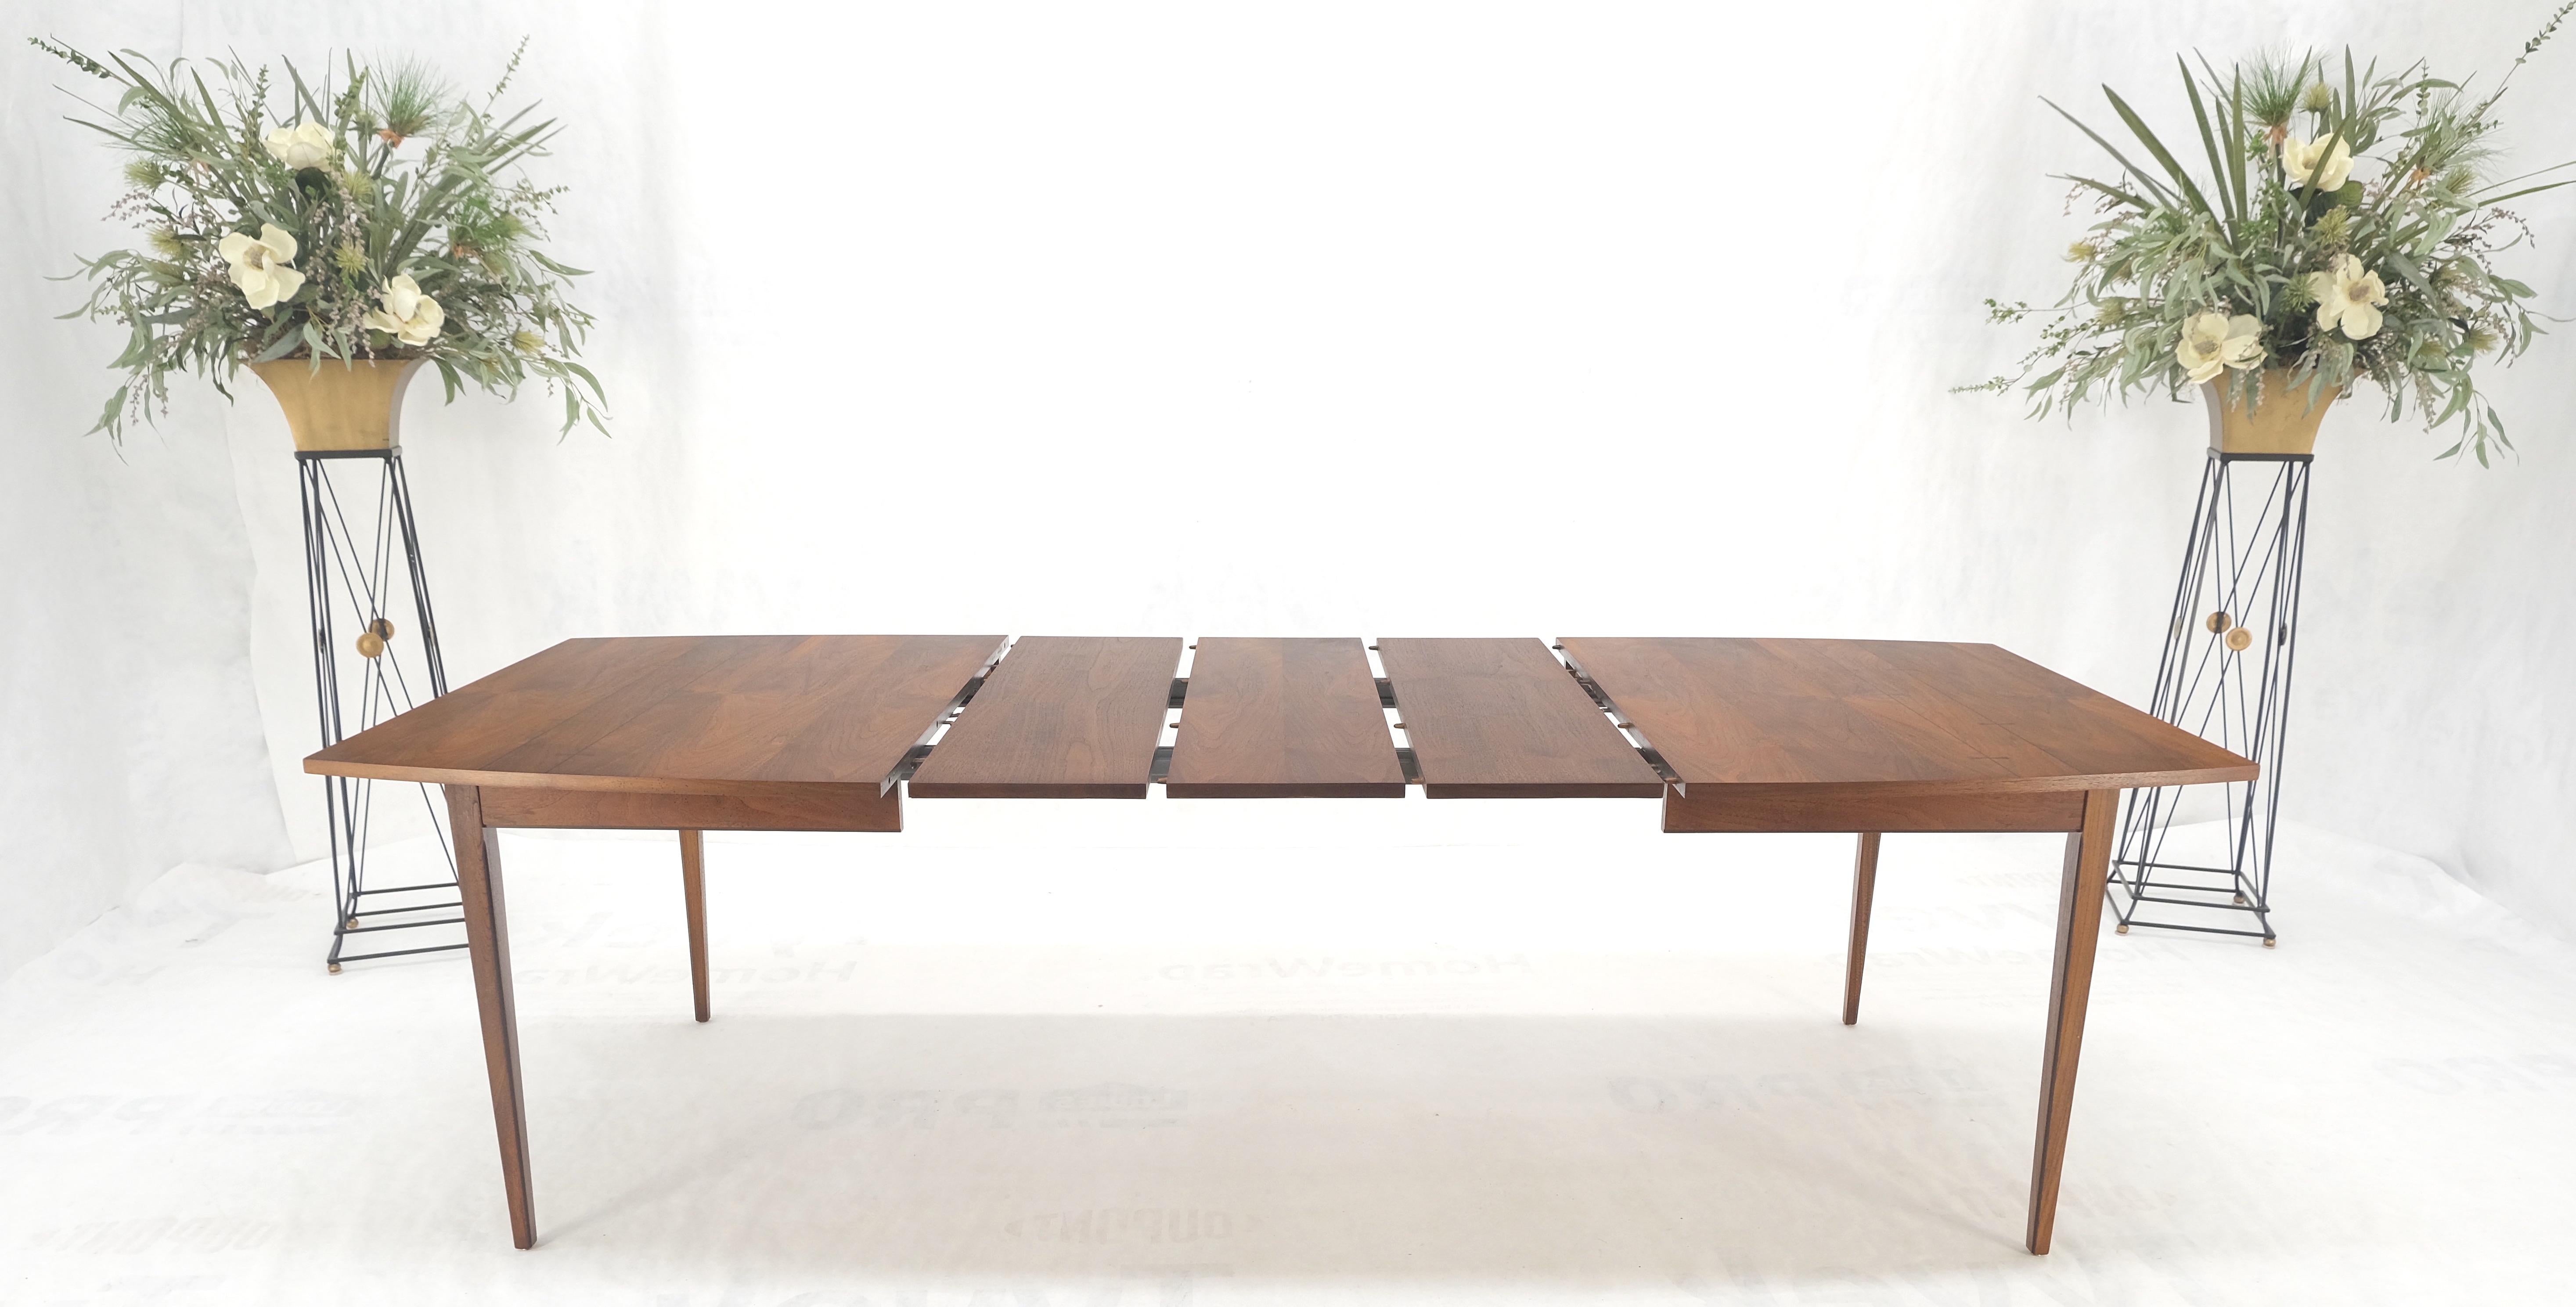 Danish Mid Century Modern Walnut Butterfly Accents Boat Shape Dining Table MINT! For Sale 2